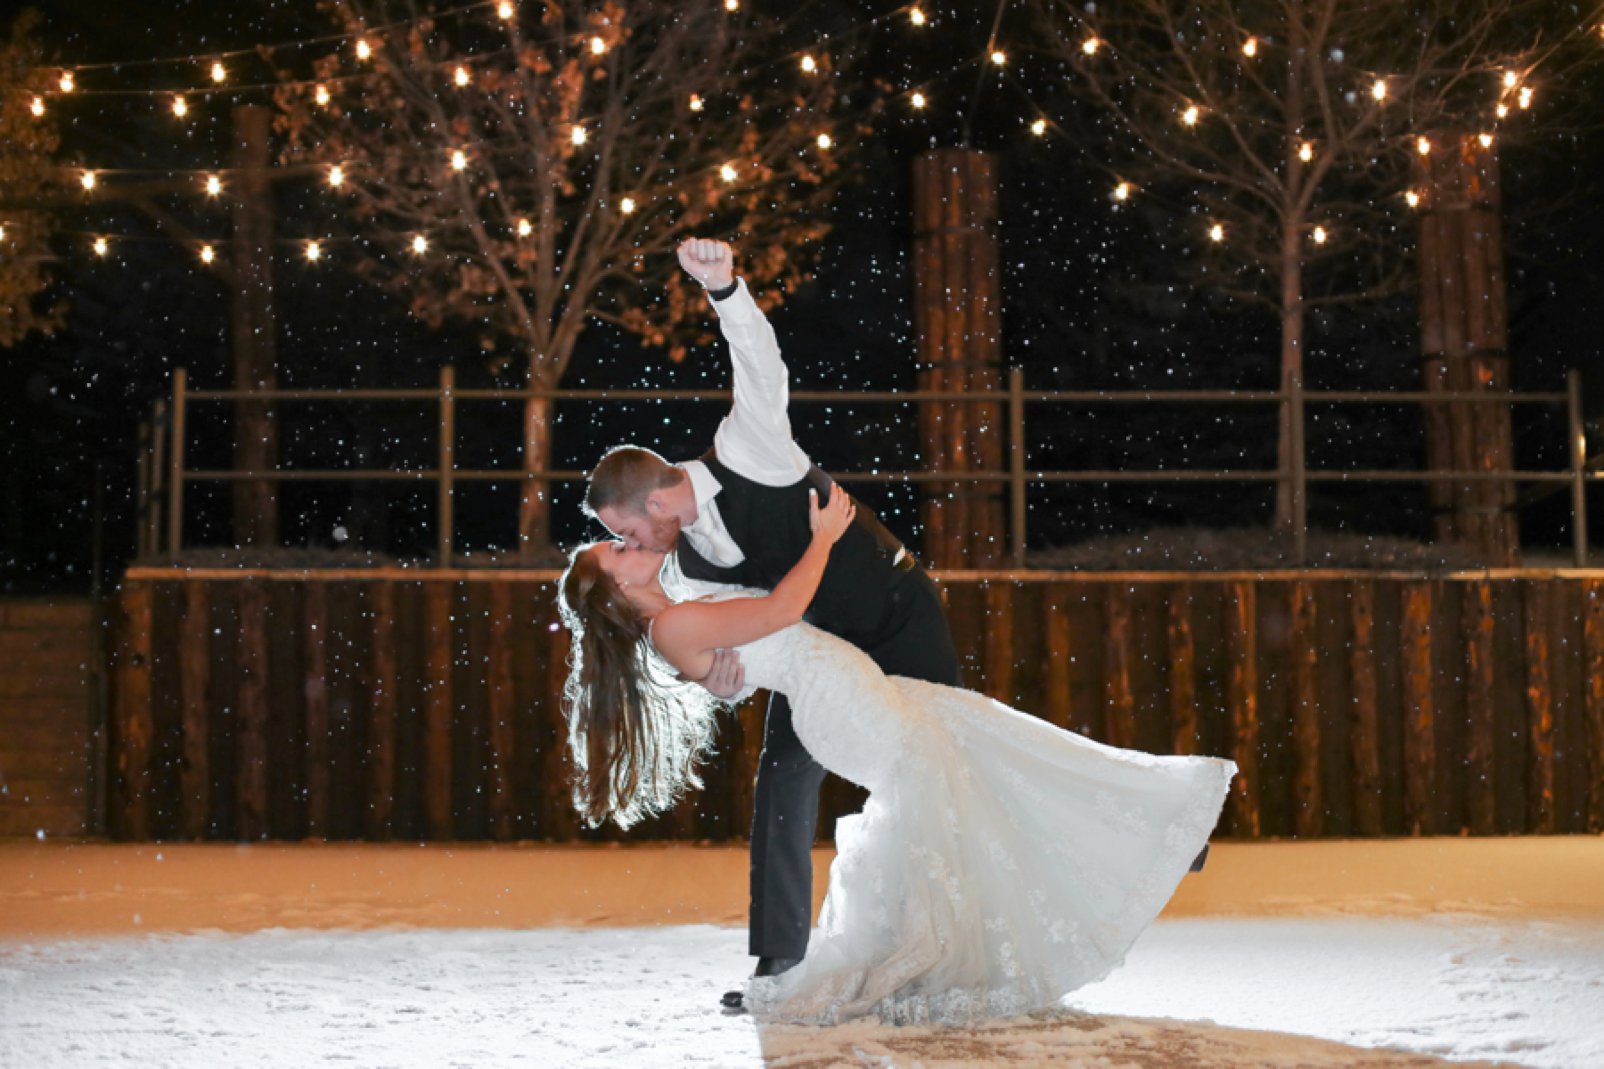 night photo with snow during colorado winter wedding at spruce mountain ranch